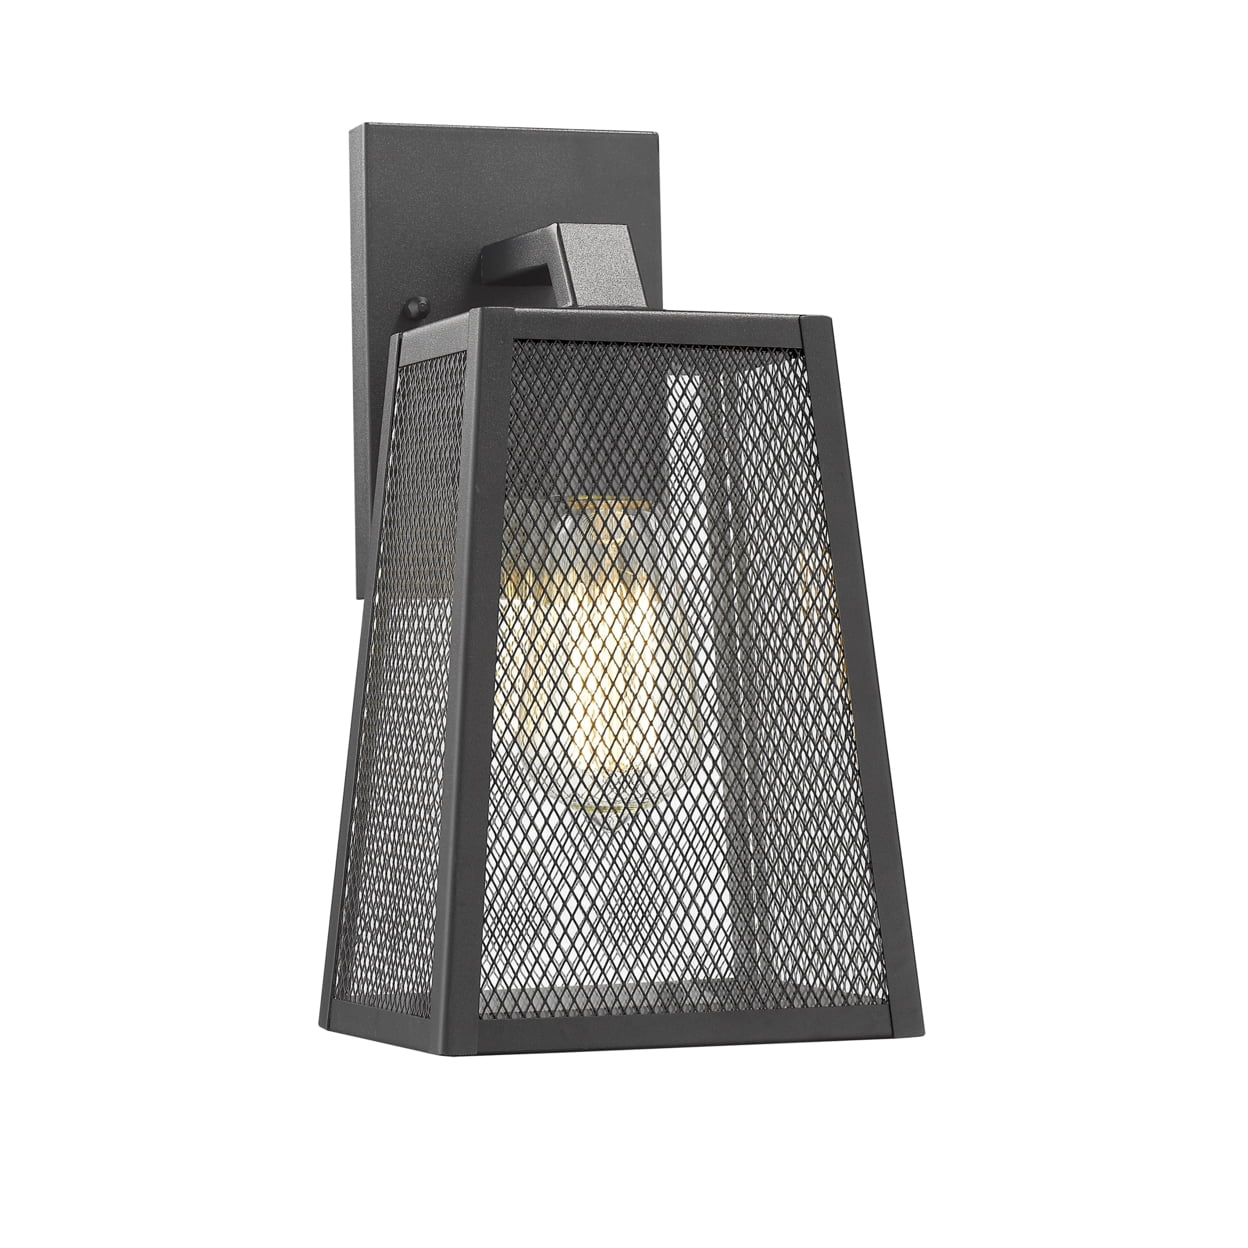 Picture of Chloe Lighting CH2D286BK12-OD1 Emerson Industrial 1 Light Textured Black Outdoor Wall Sconce - 12 in.